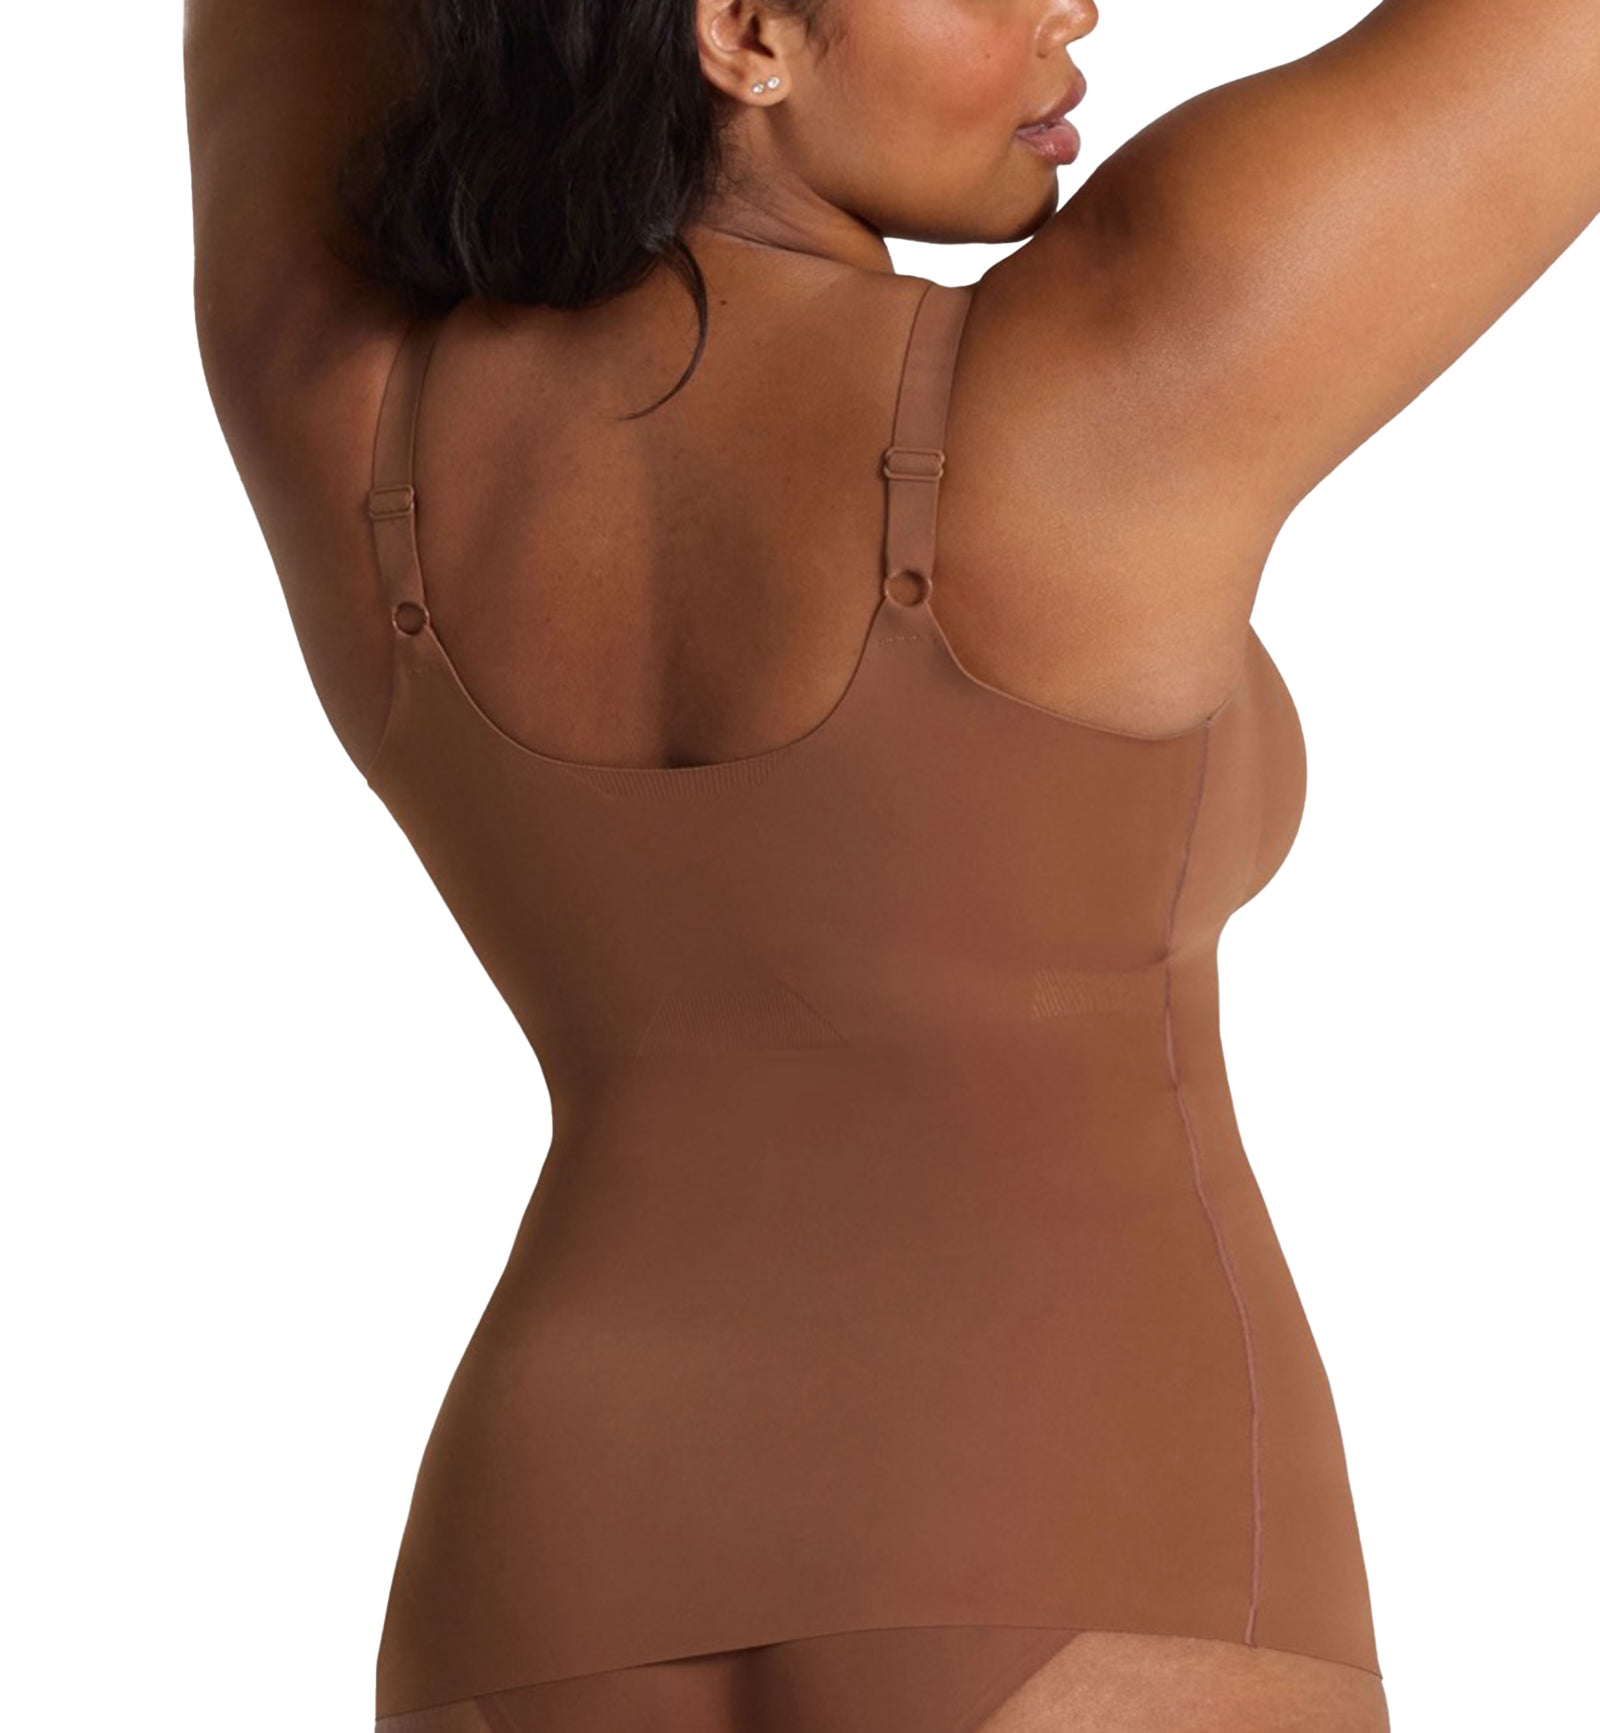 Evelyn & Bobbie Structured Scoop Bra Tank (1811),Small,Clay - Clay,Small